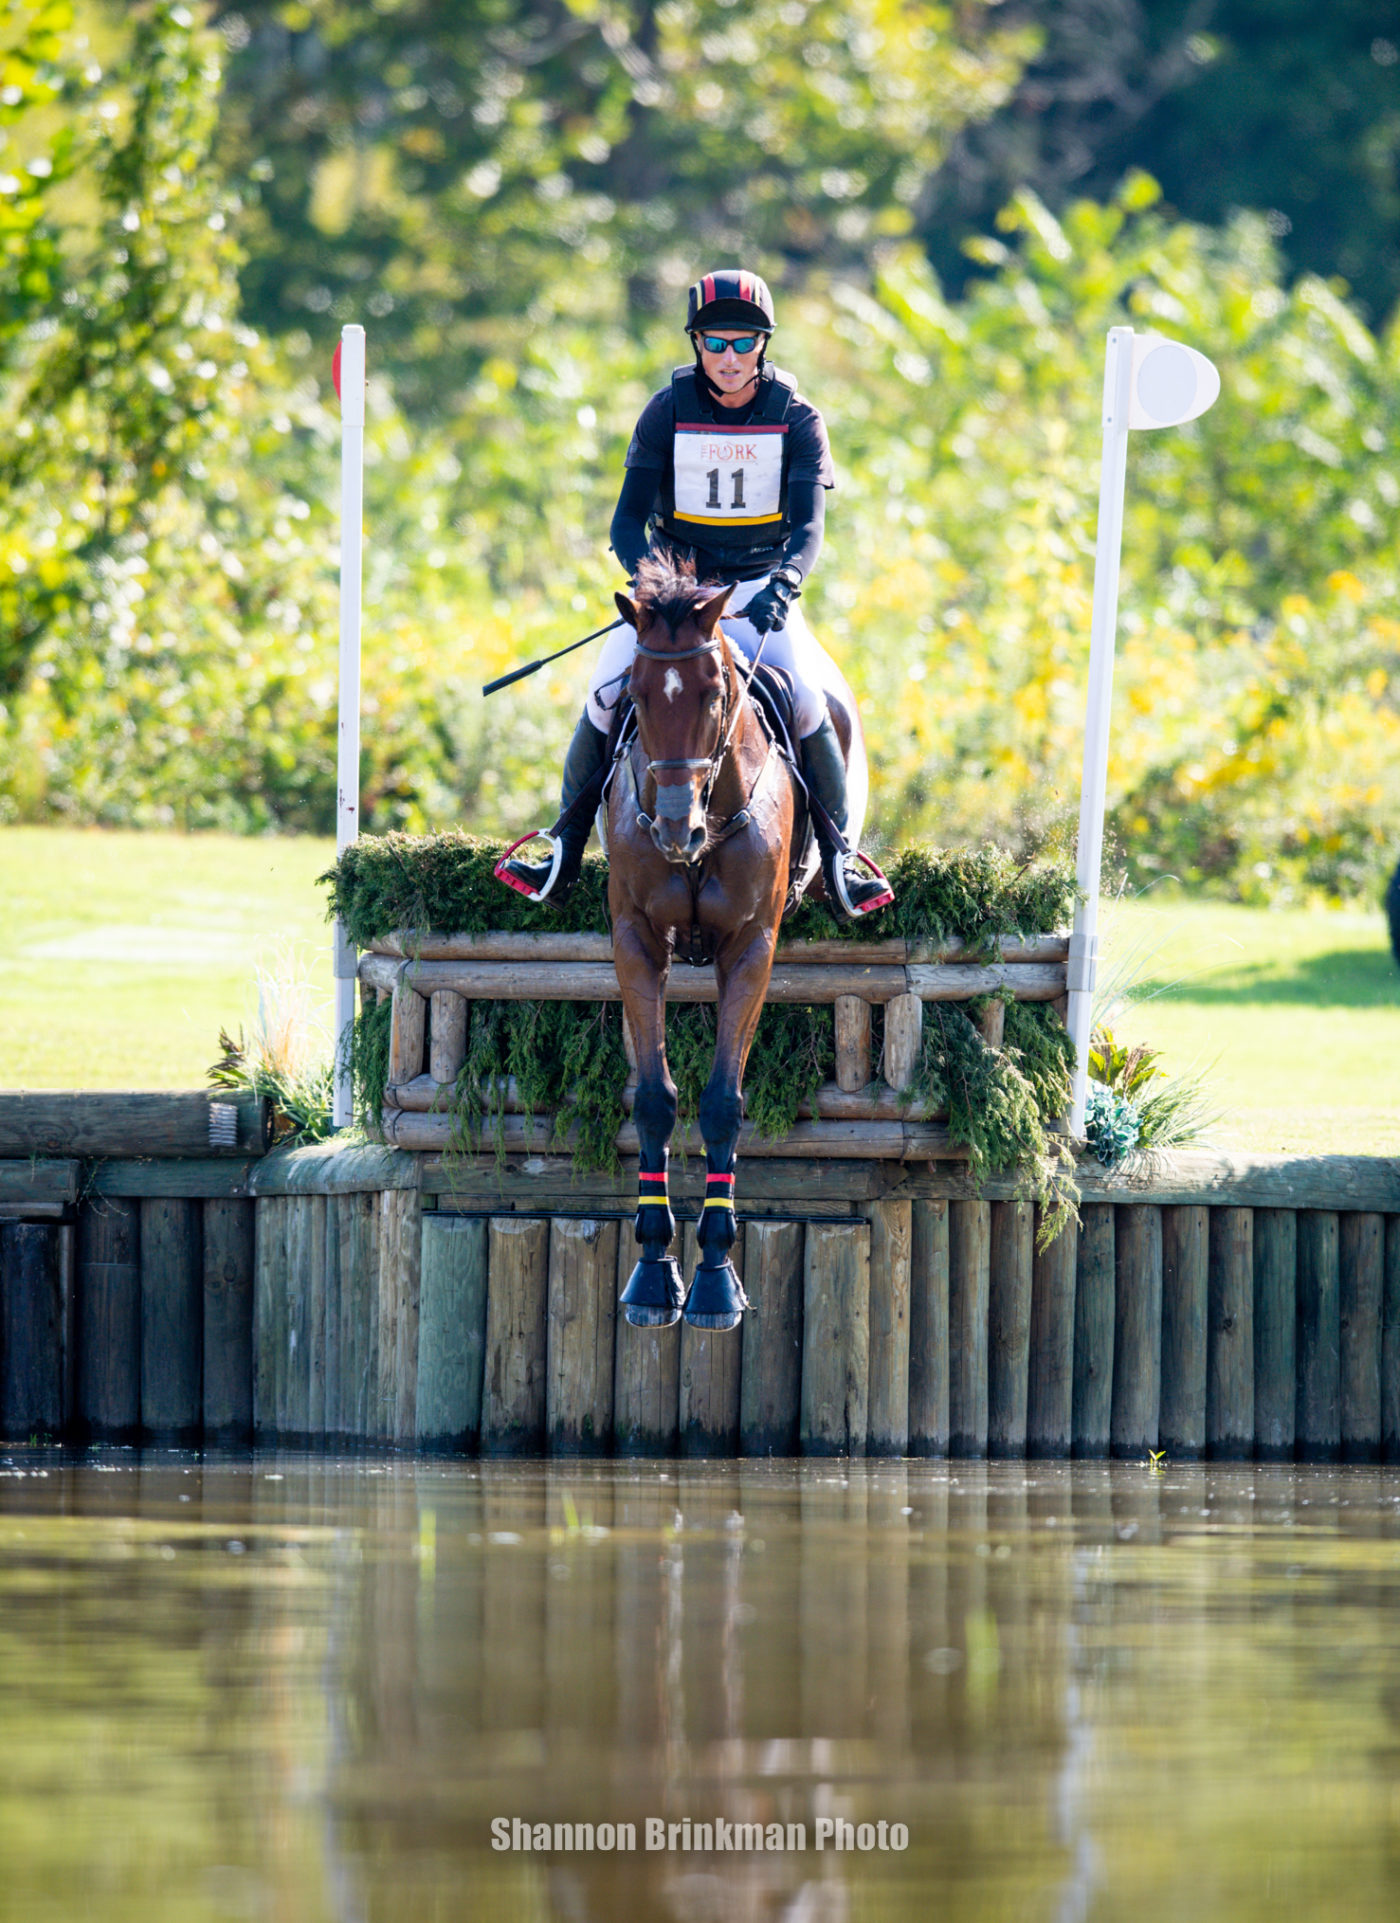 Doug Payne and Quantum Leap finished up the CCI4*-S in third. Shannon Brinkman Photography photo